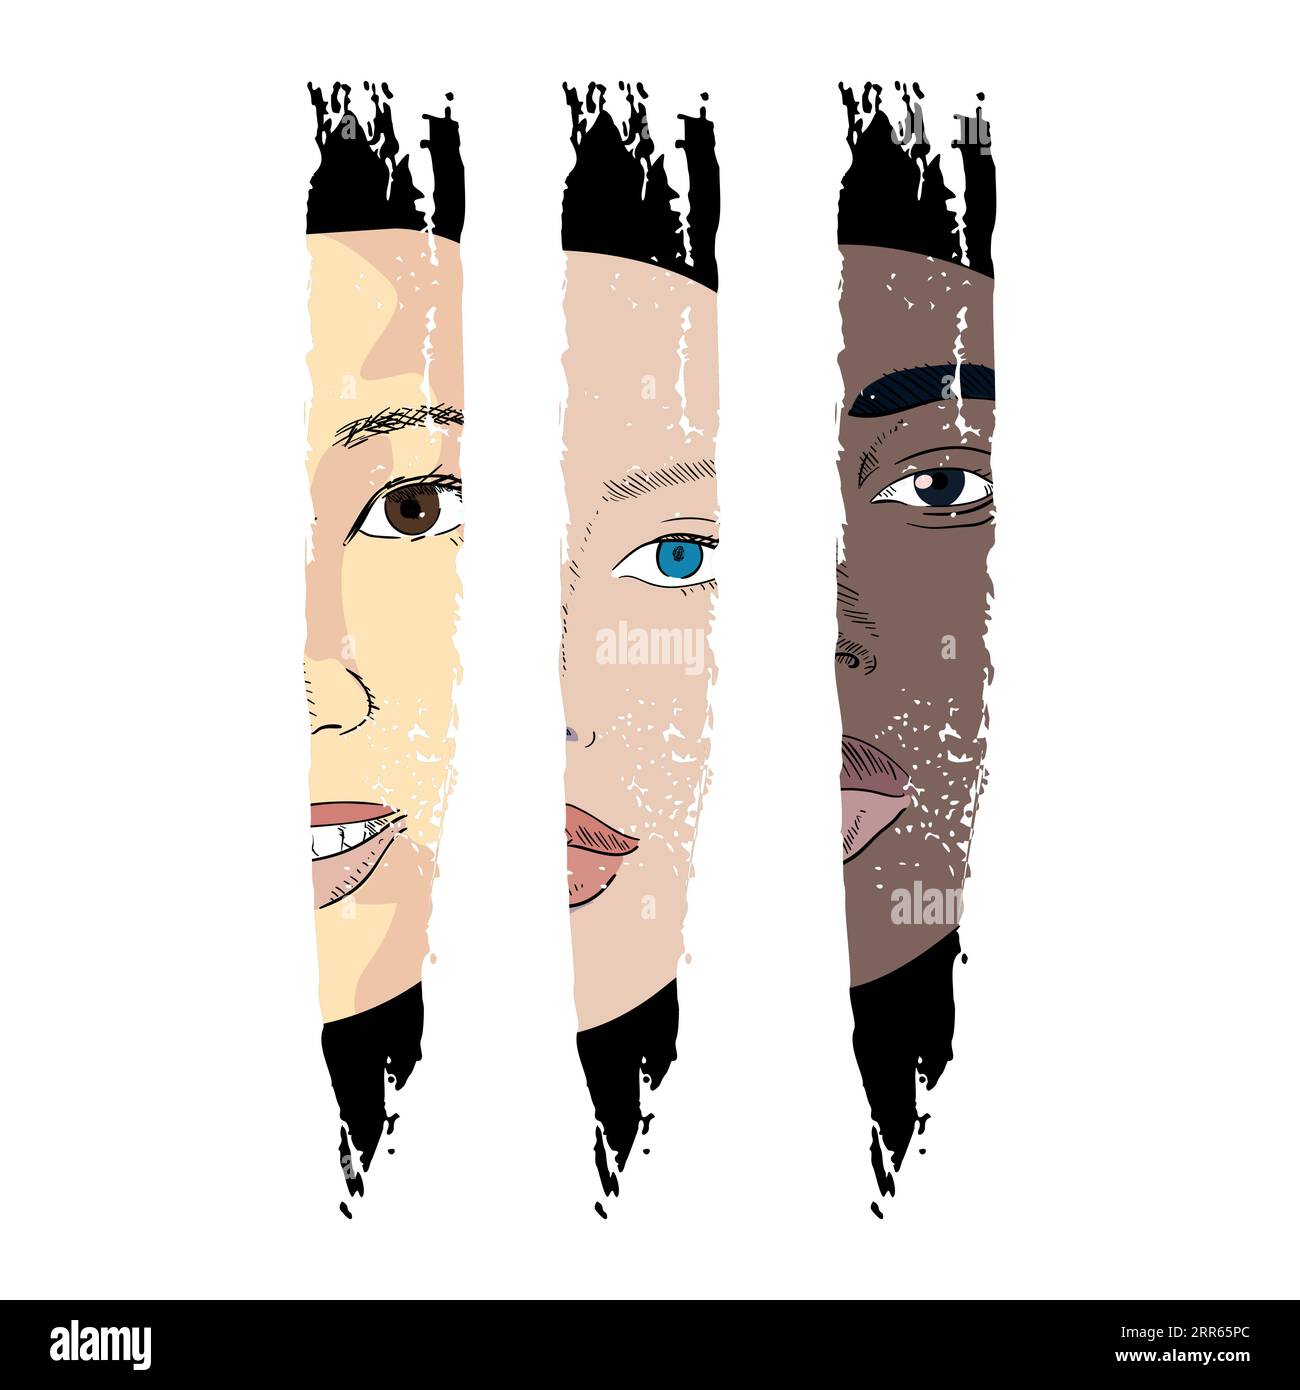 Design for a t-shirt with three faces of women of different skin colors. Good vector illustration to represent the feminist struggle. Stock Vector